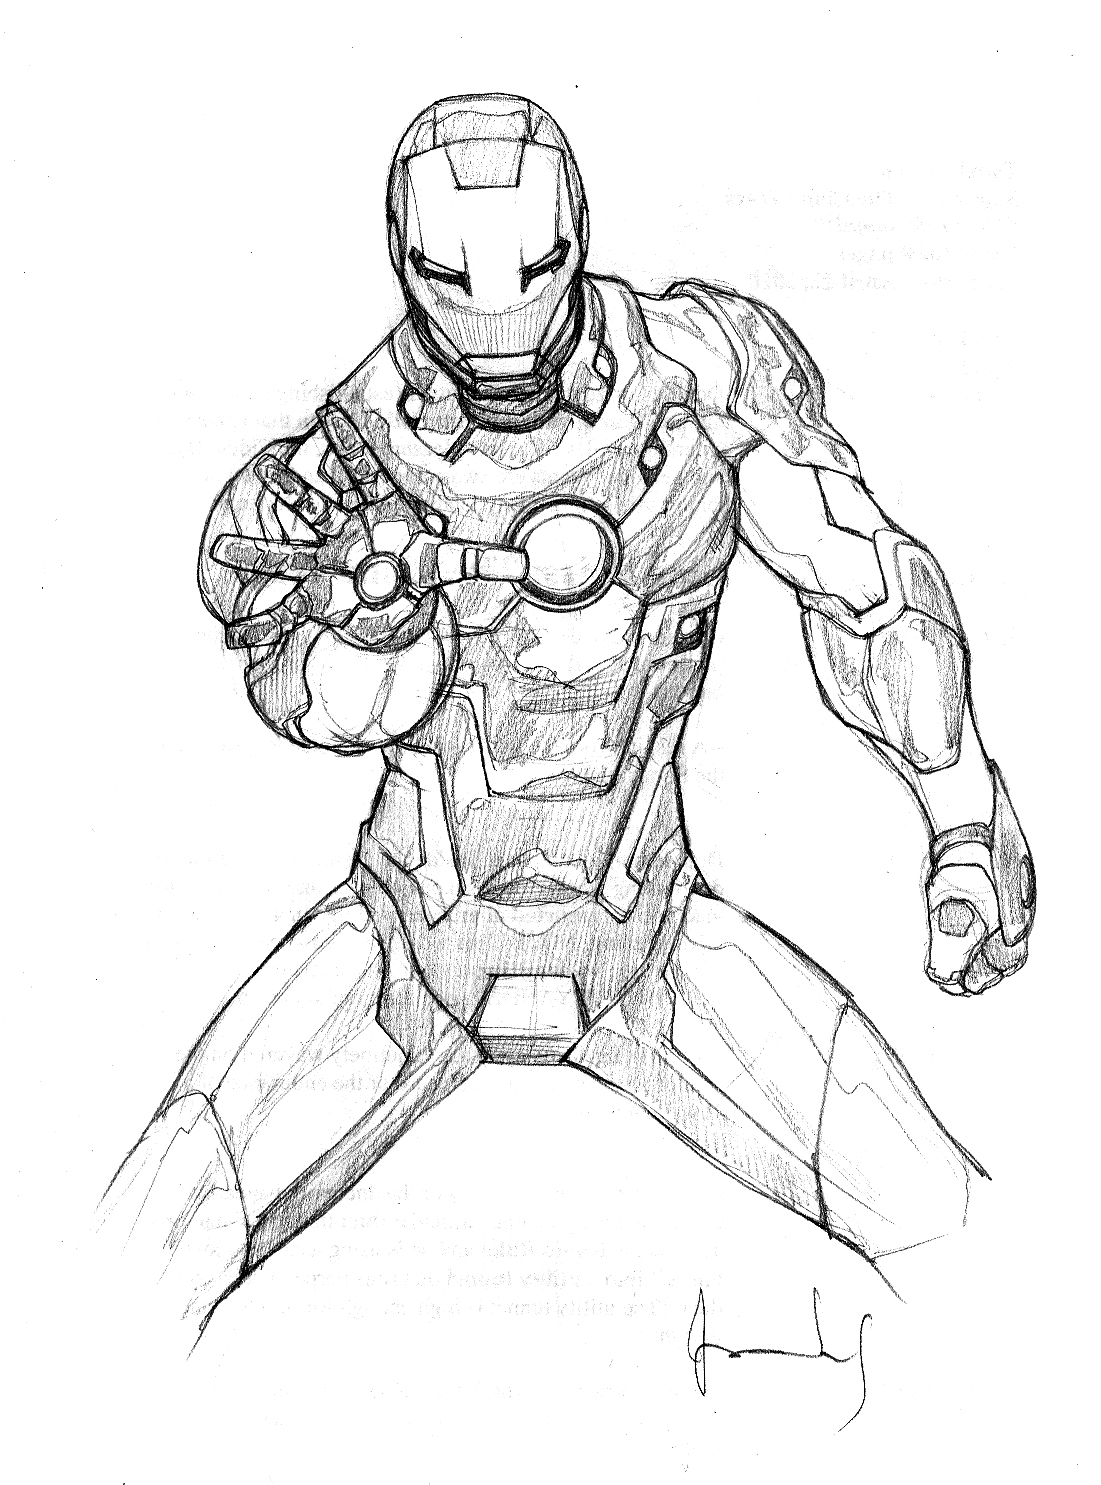 In the hype for Endgame, I did a colored pencil drawing of Iron Man's Mark  85 suit (spoilers for Iron Man's Endgame appearance) : r/marvelstudios